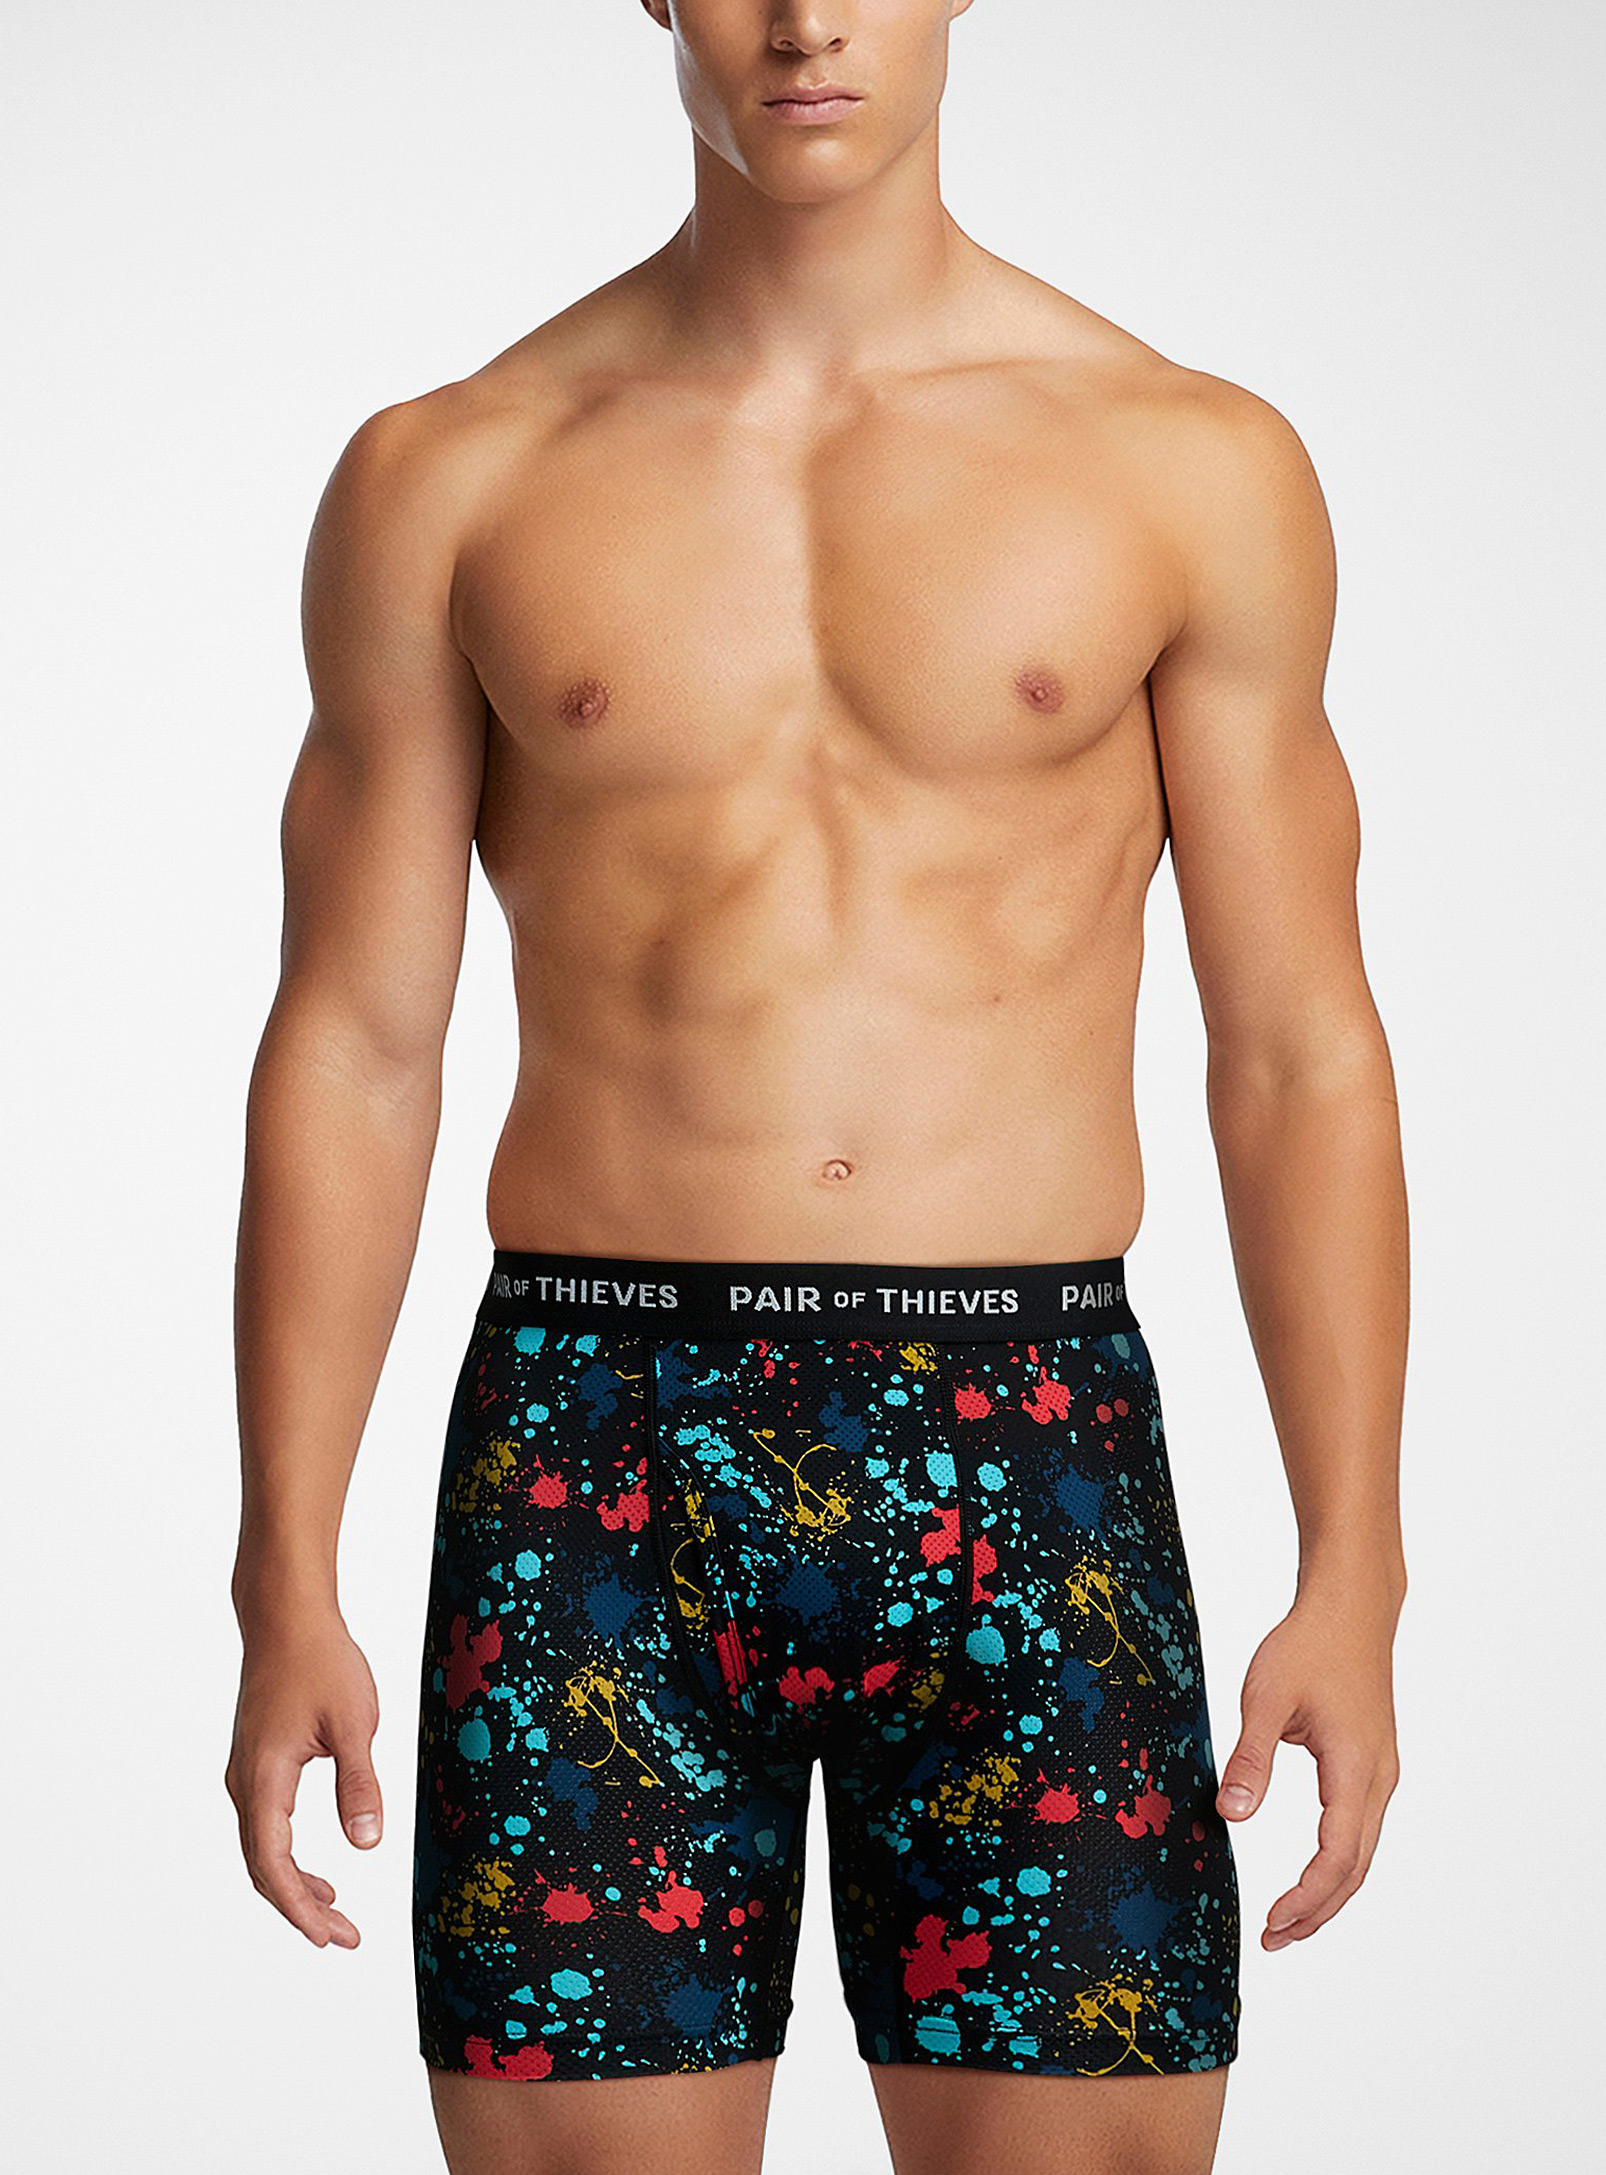 Pair Of Thieves Micro-perforated Patterned Boxer Brief In Patterned Black